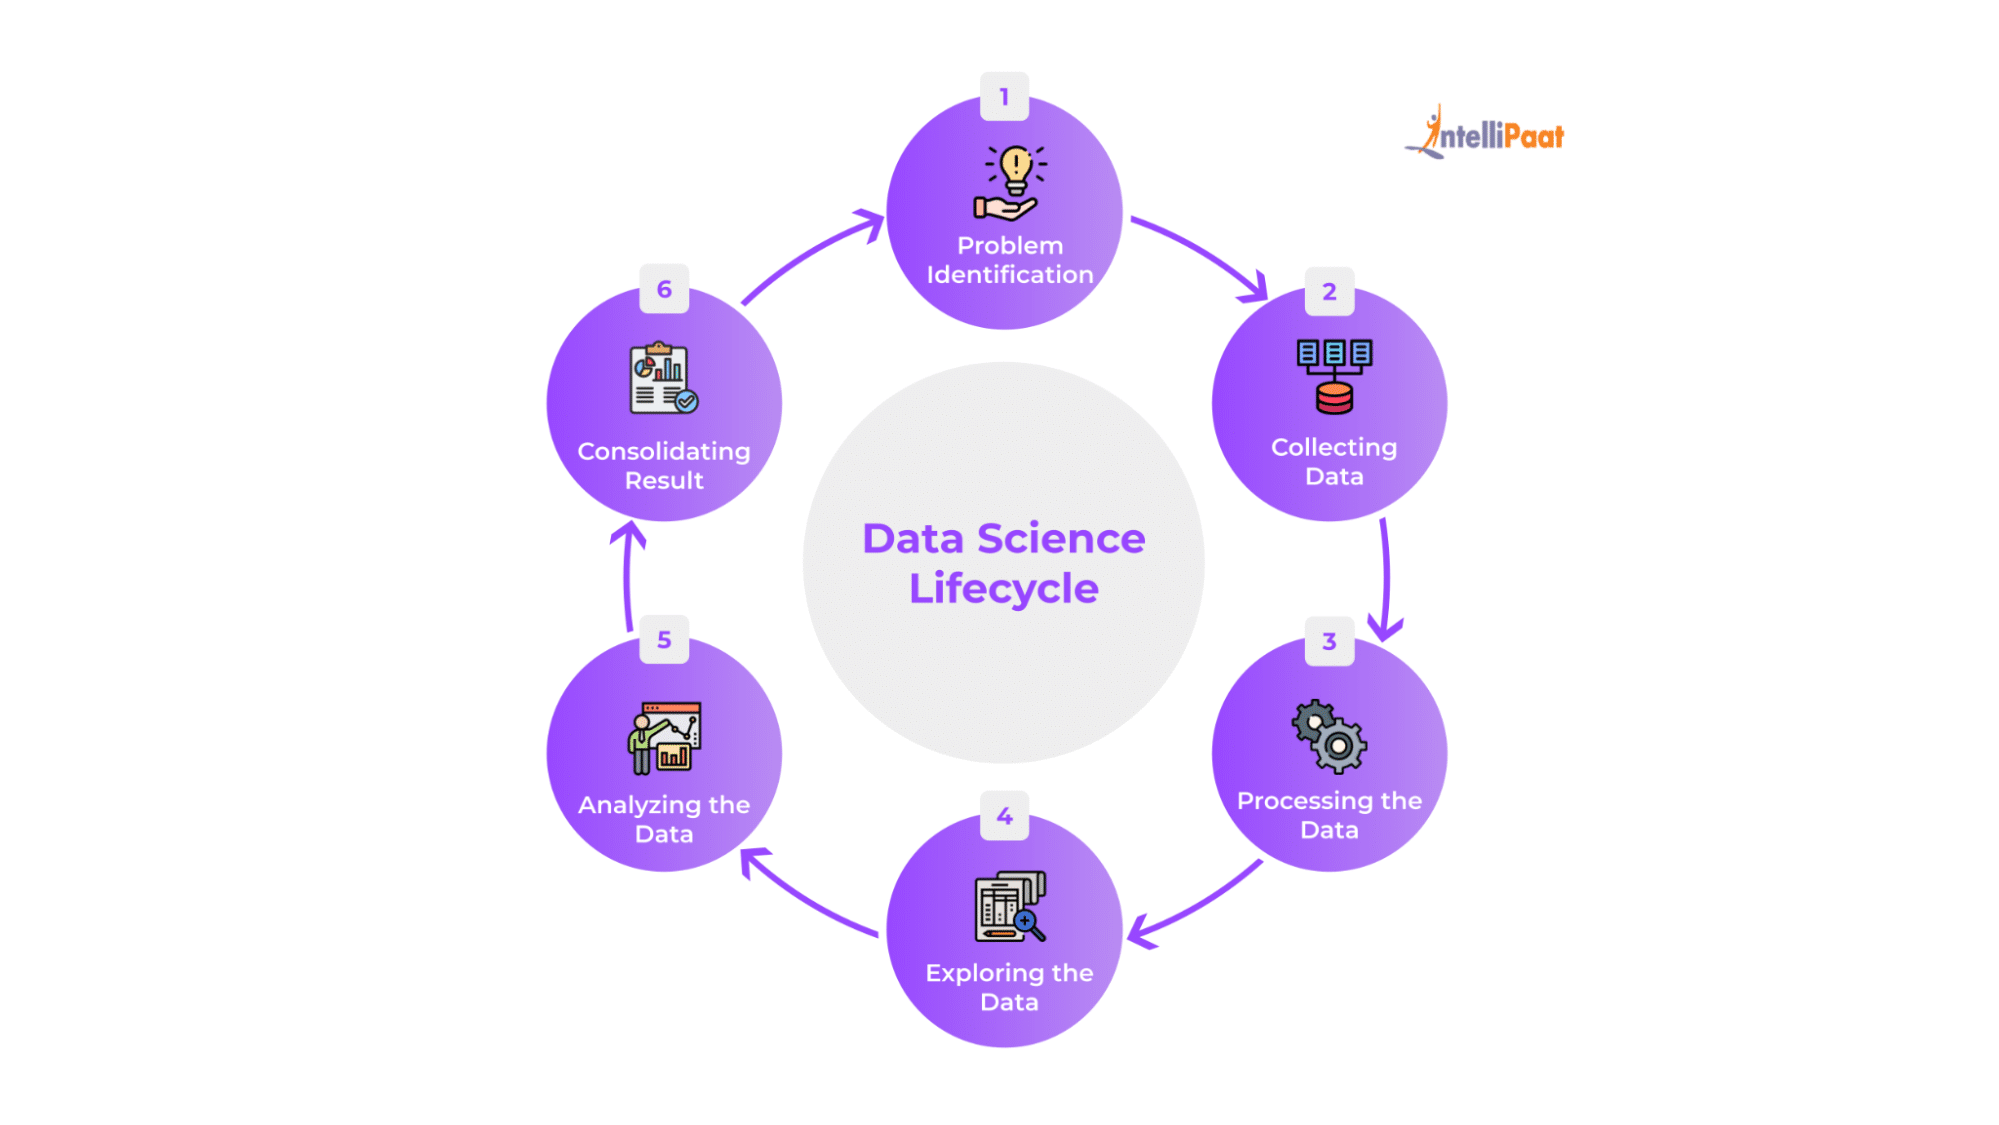 Phases of the Data Science Lifecycle